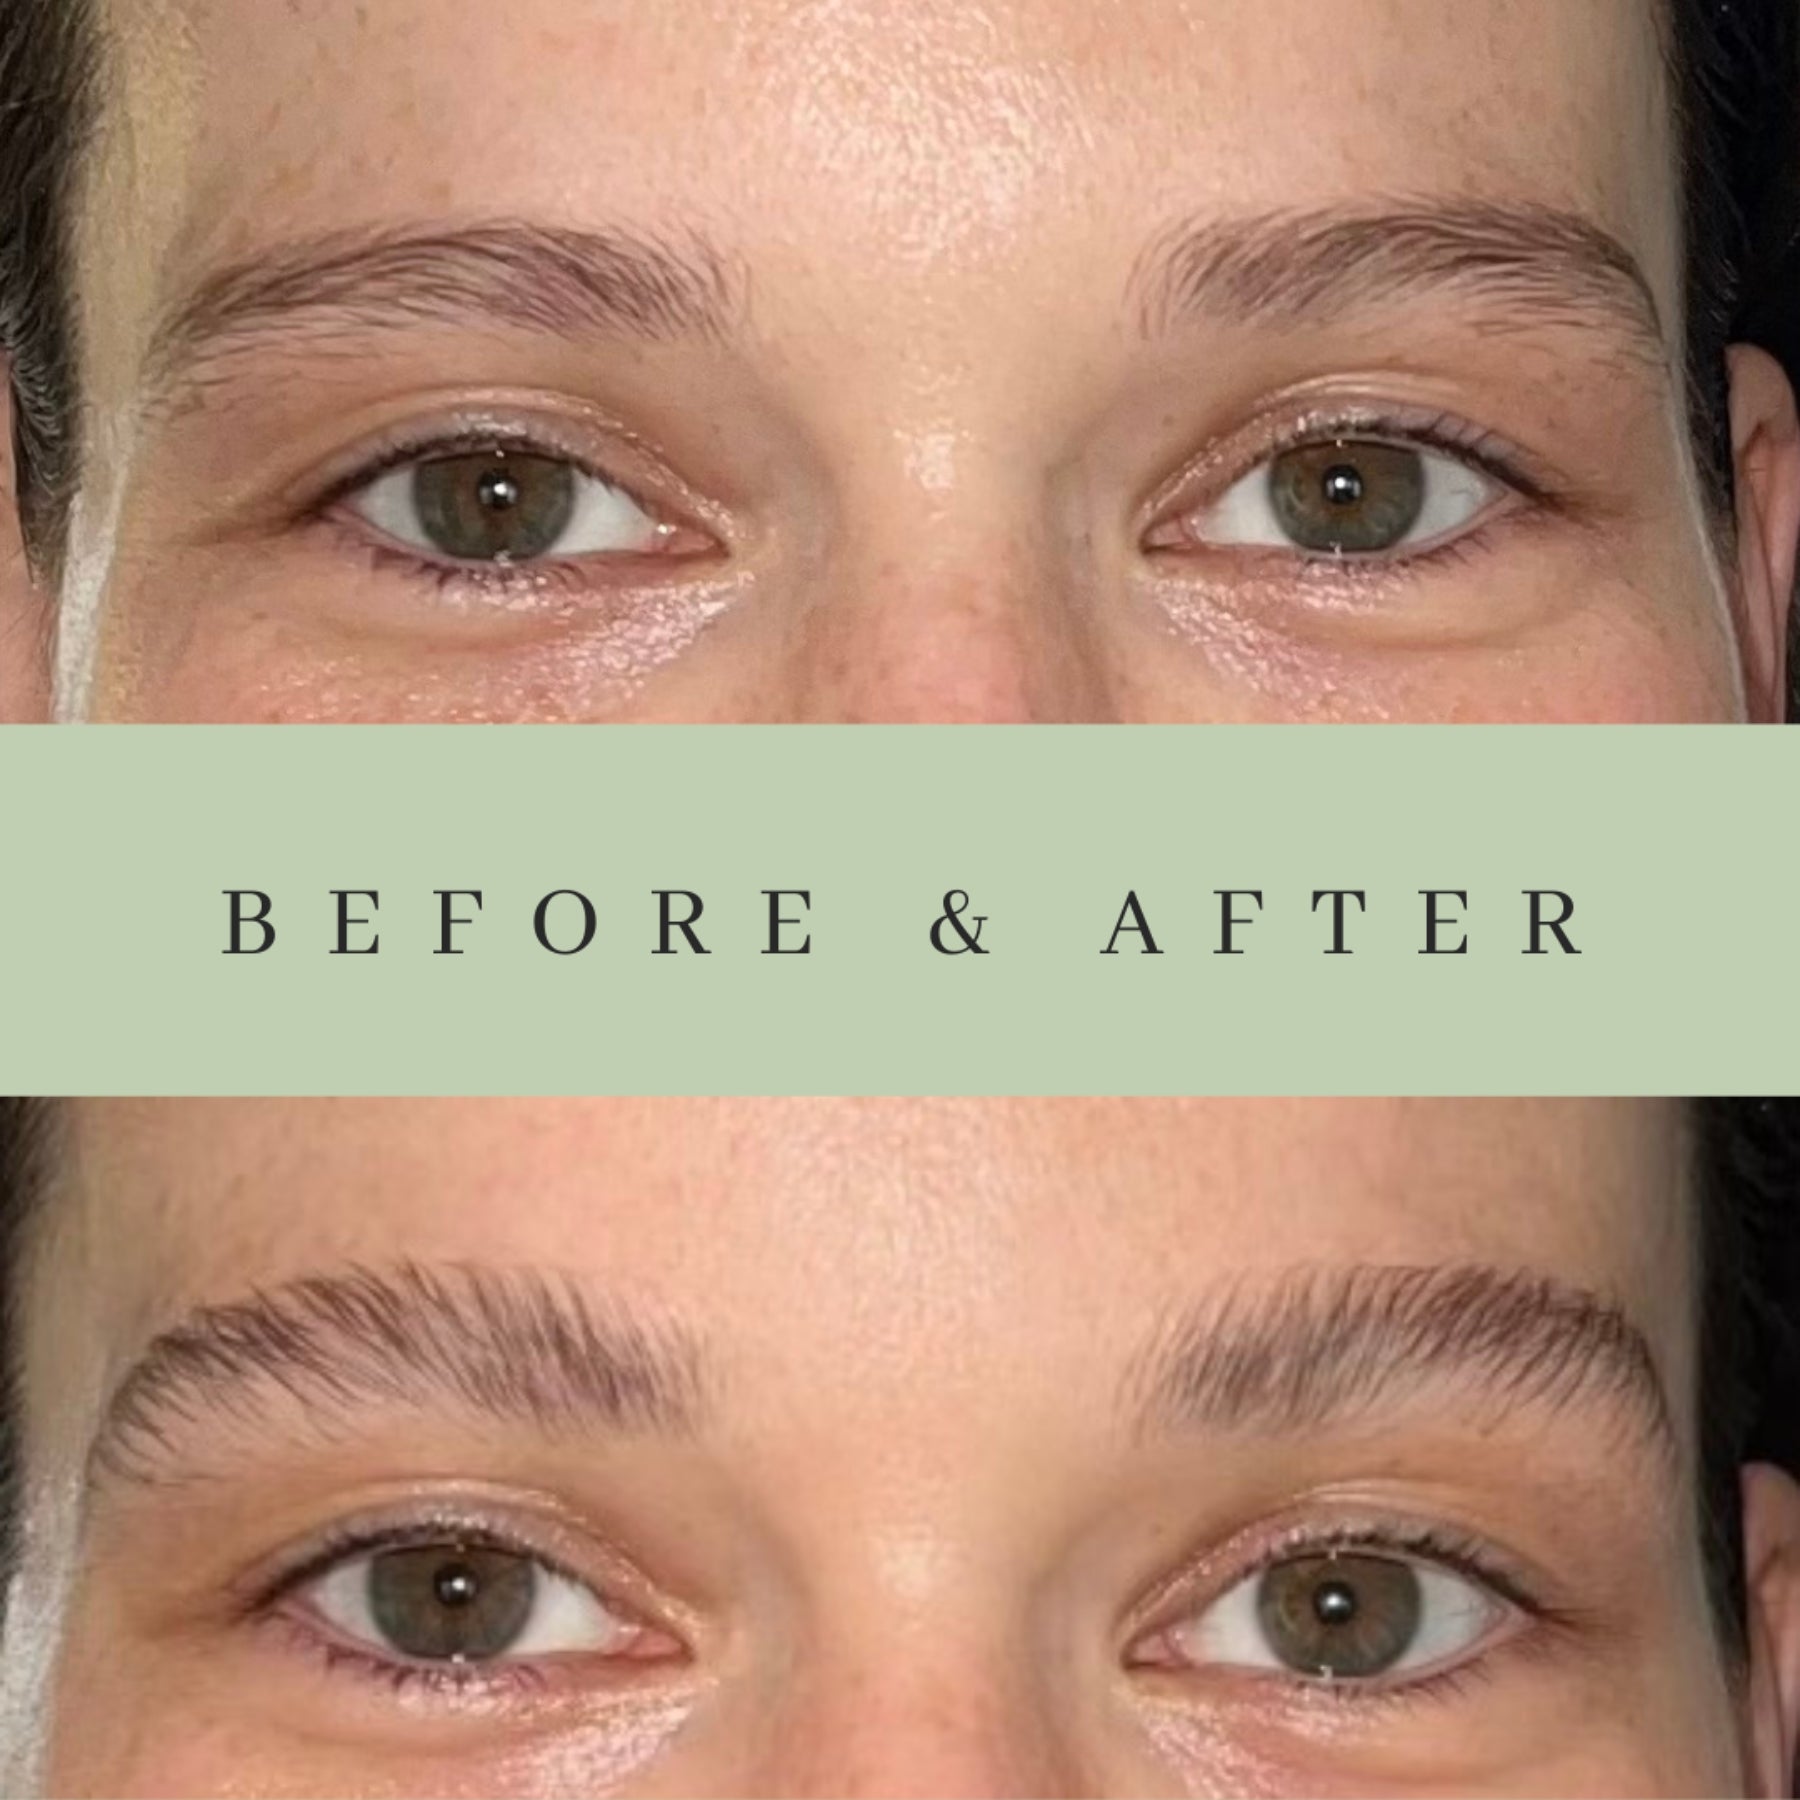 Testimonial photo of a woman's eyebrows after using the Brow Styling Wax & Clay.